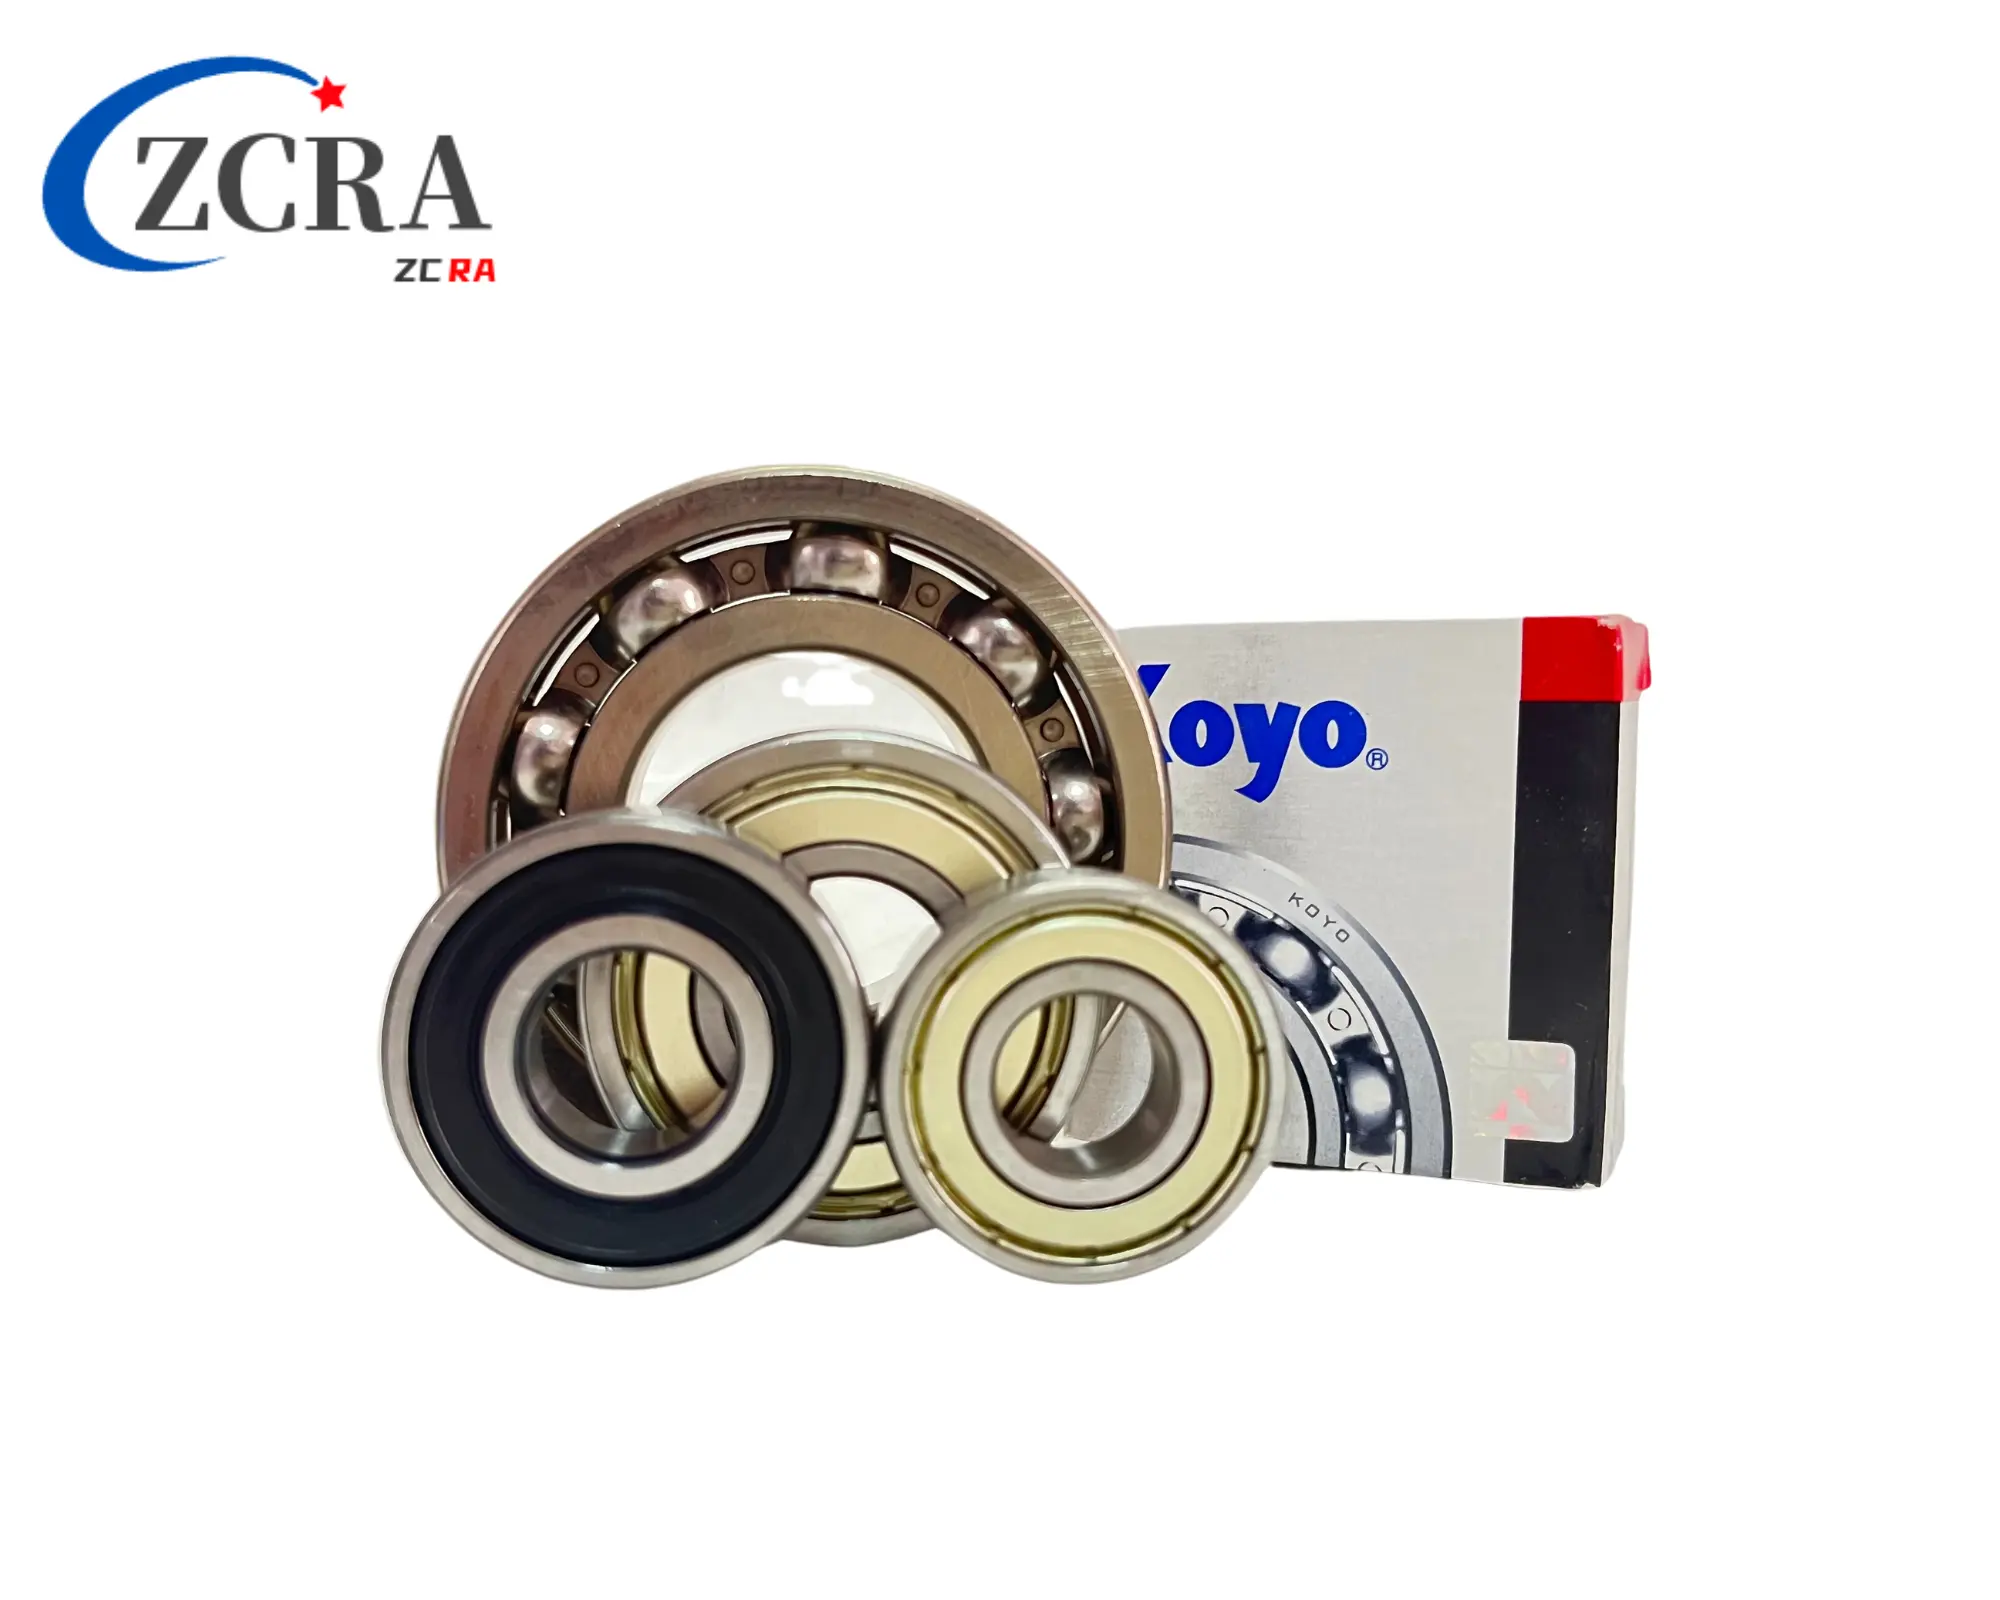 Koyo 6201-2RSC3 Ball Bearing Price 6201zz Deep groove ball bearing Used for bicycles and motorcycles